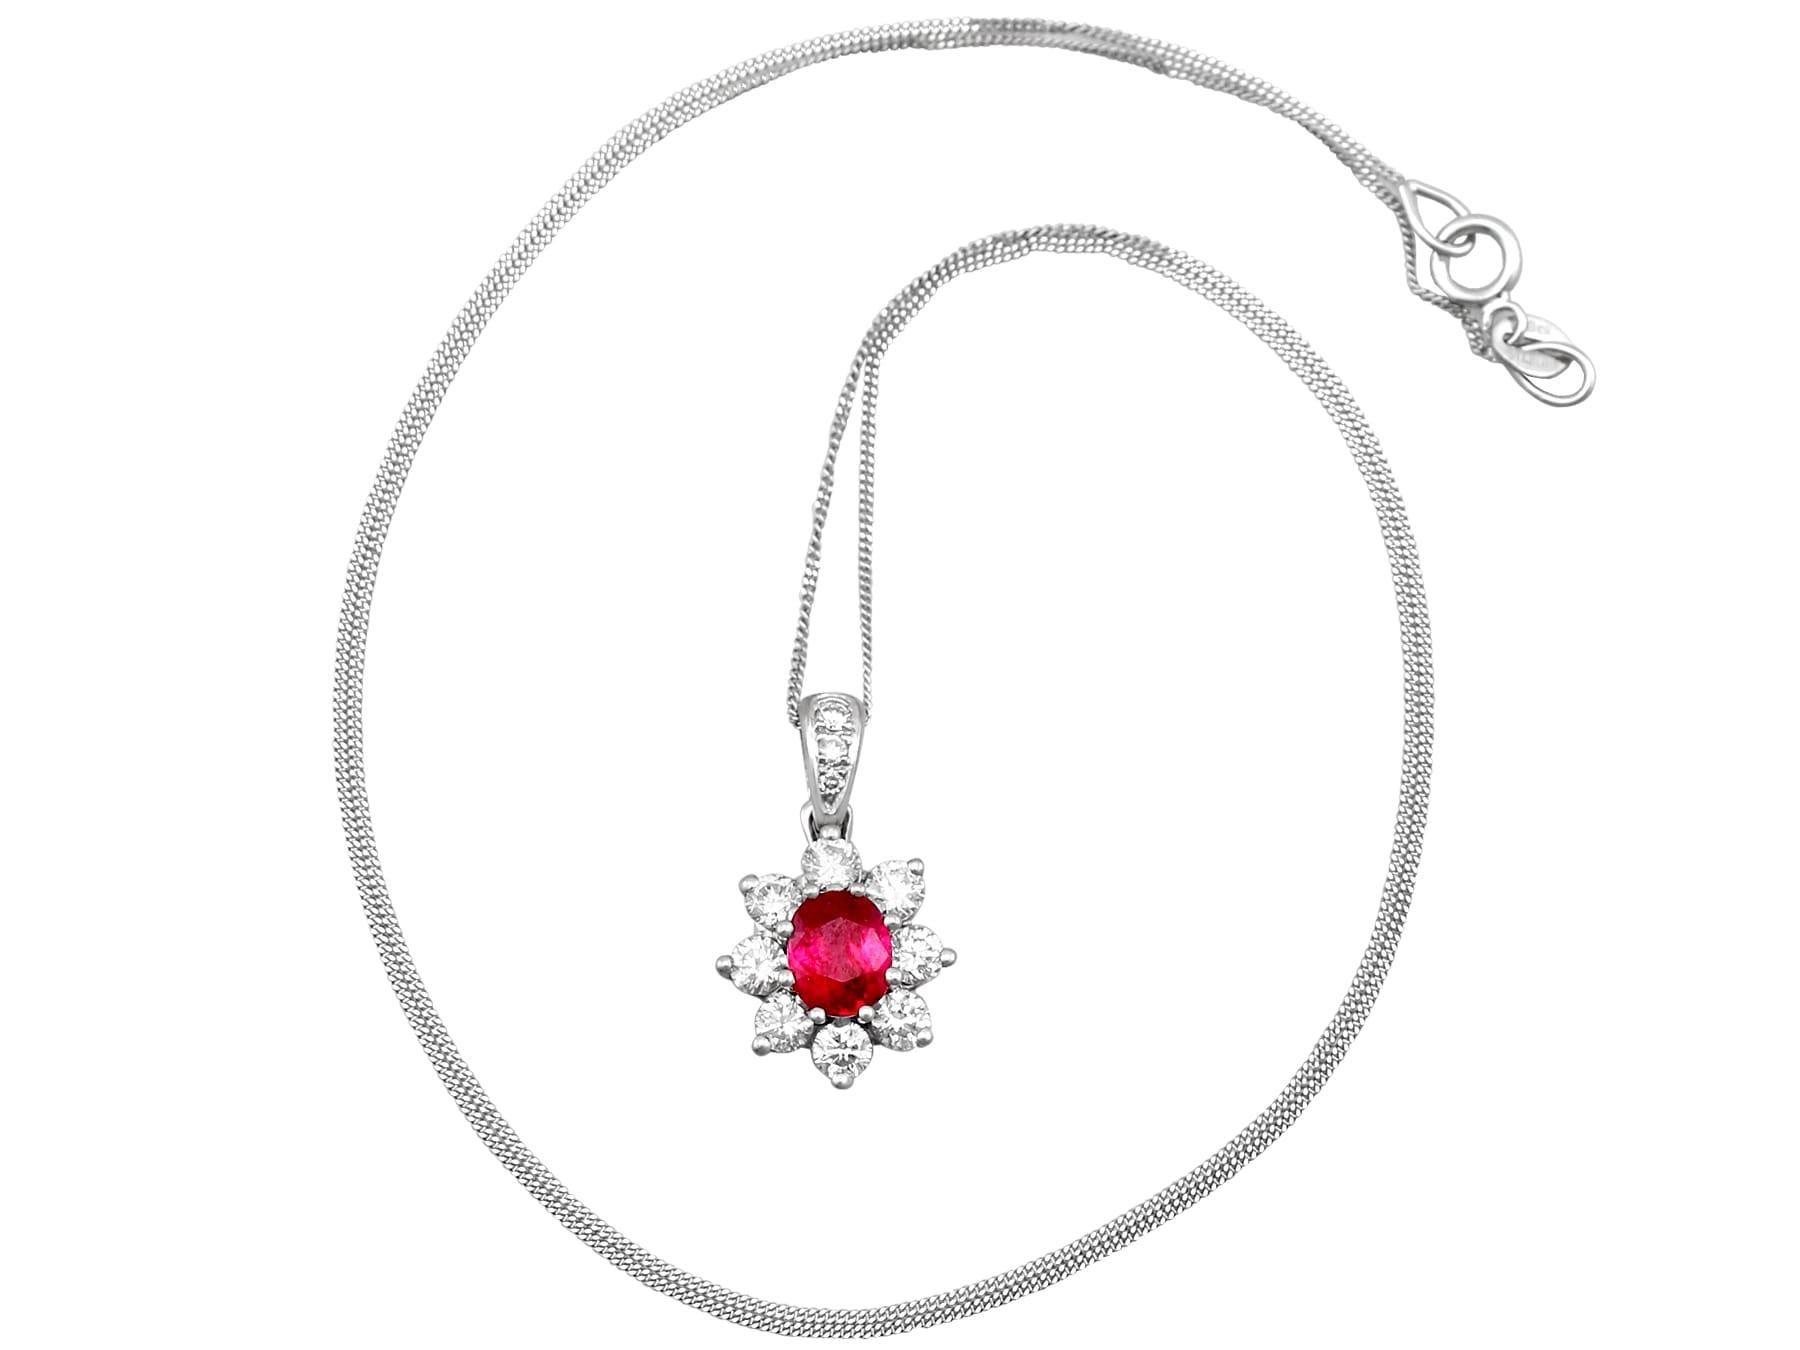 An impressive vintage 0.80 carat ruby and 0.58 carat diamond, 18 karat white gold pendant and chain; part of our diverse vintage jewelry and estate jewelry collections.

This fine and impressive vintage 1970s ruby and diamond pendant has been